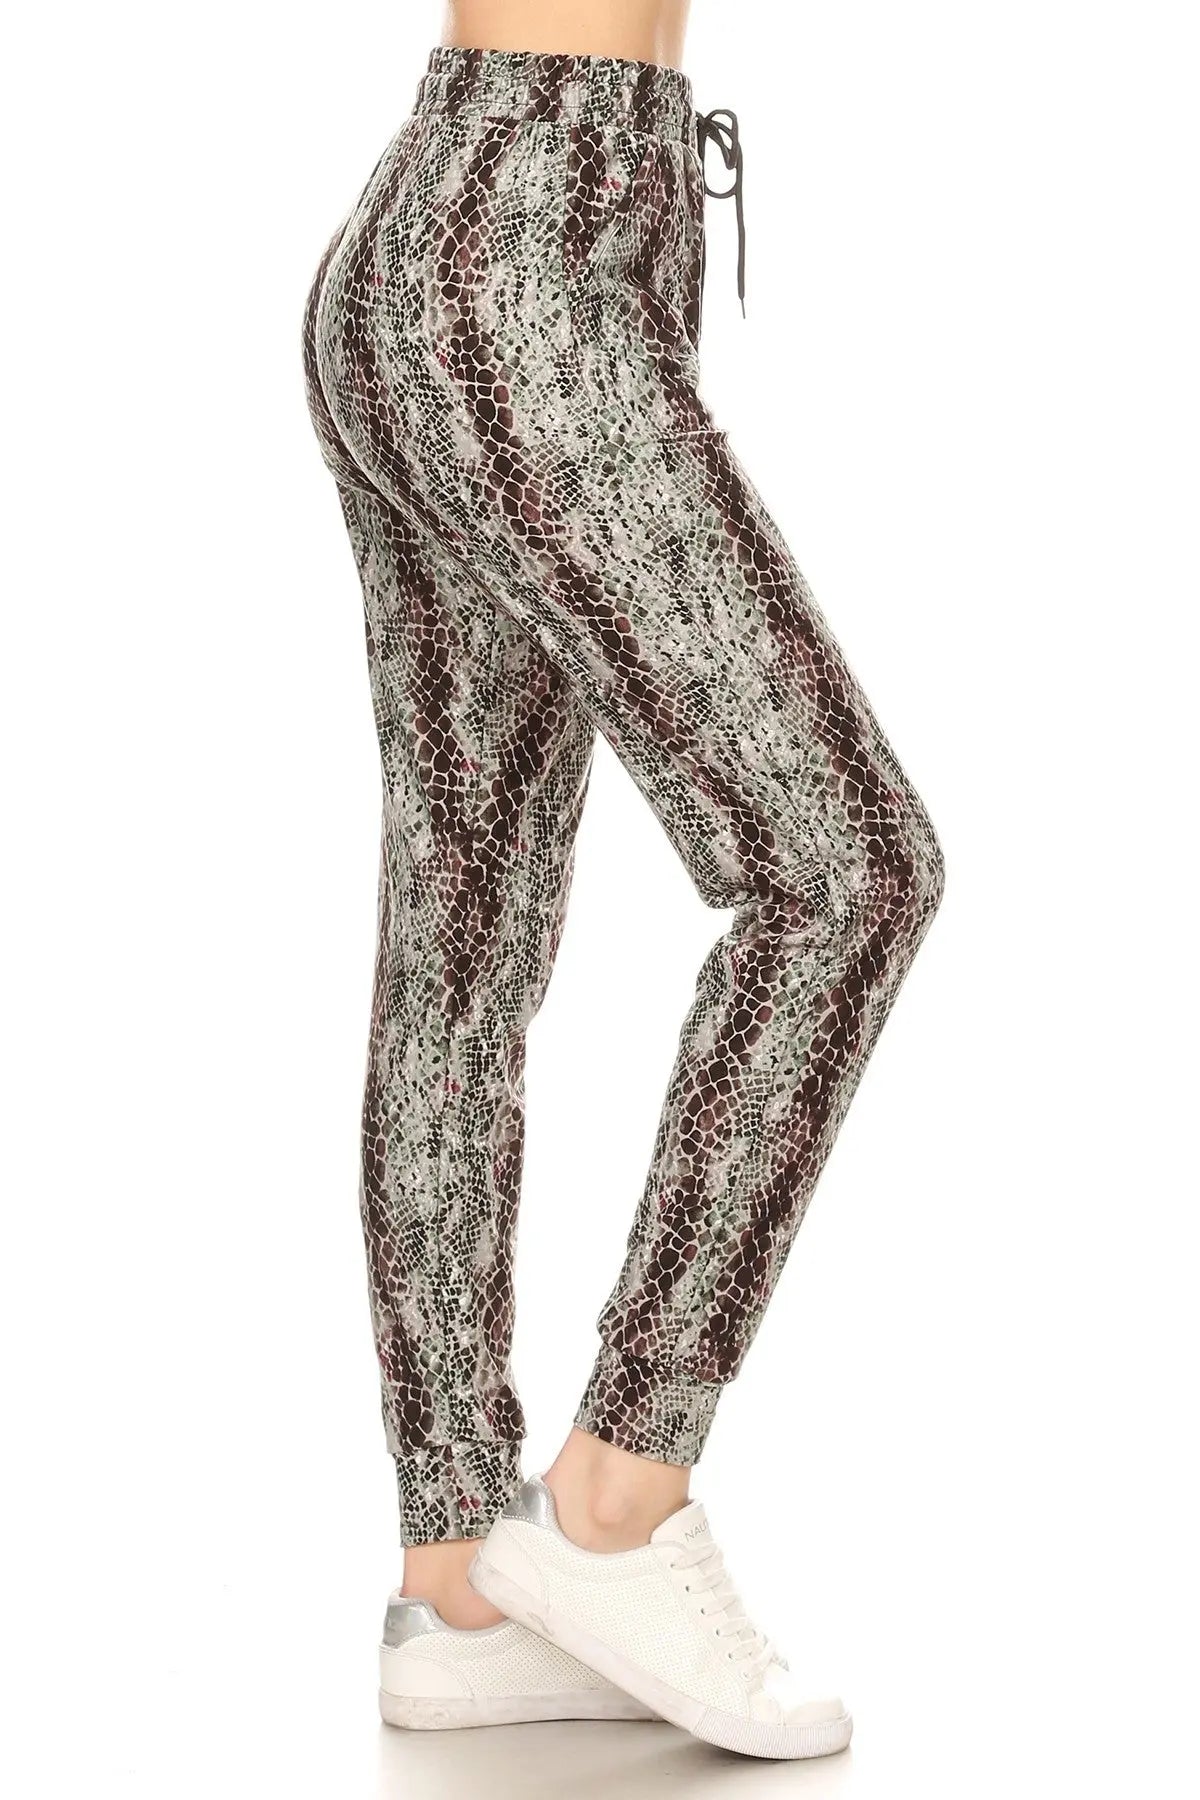 Snakeskin Printed Joggers With Solid Trim, Drawstring Waistband, Waist Sunny EvE Fashion